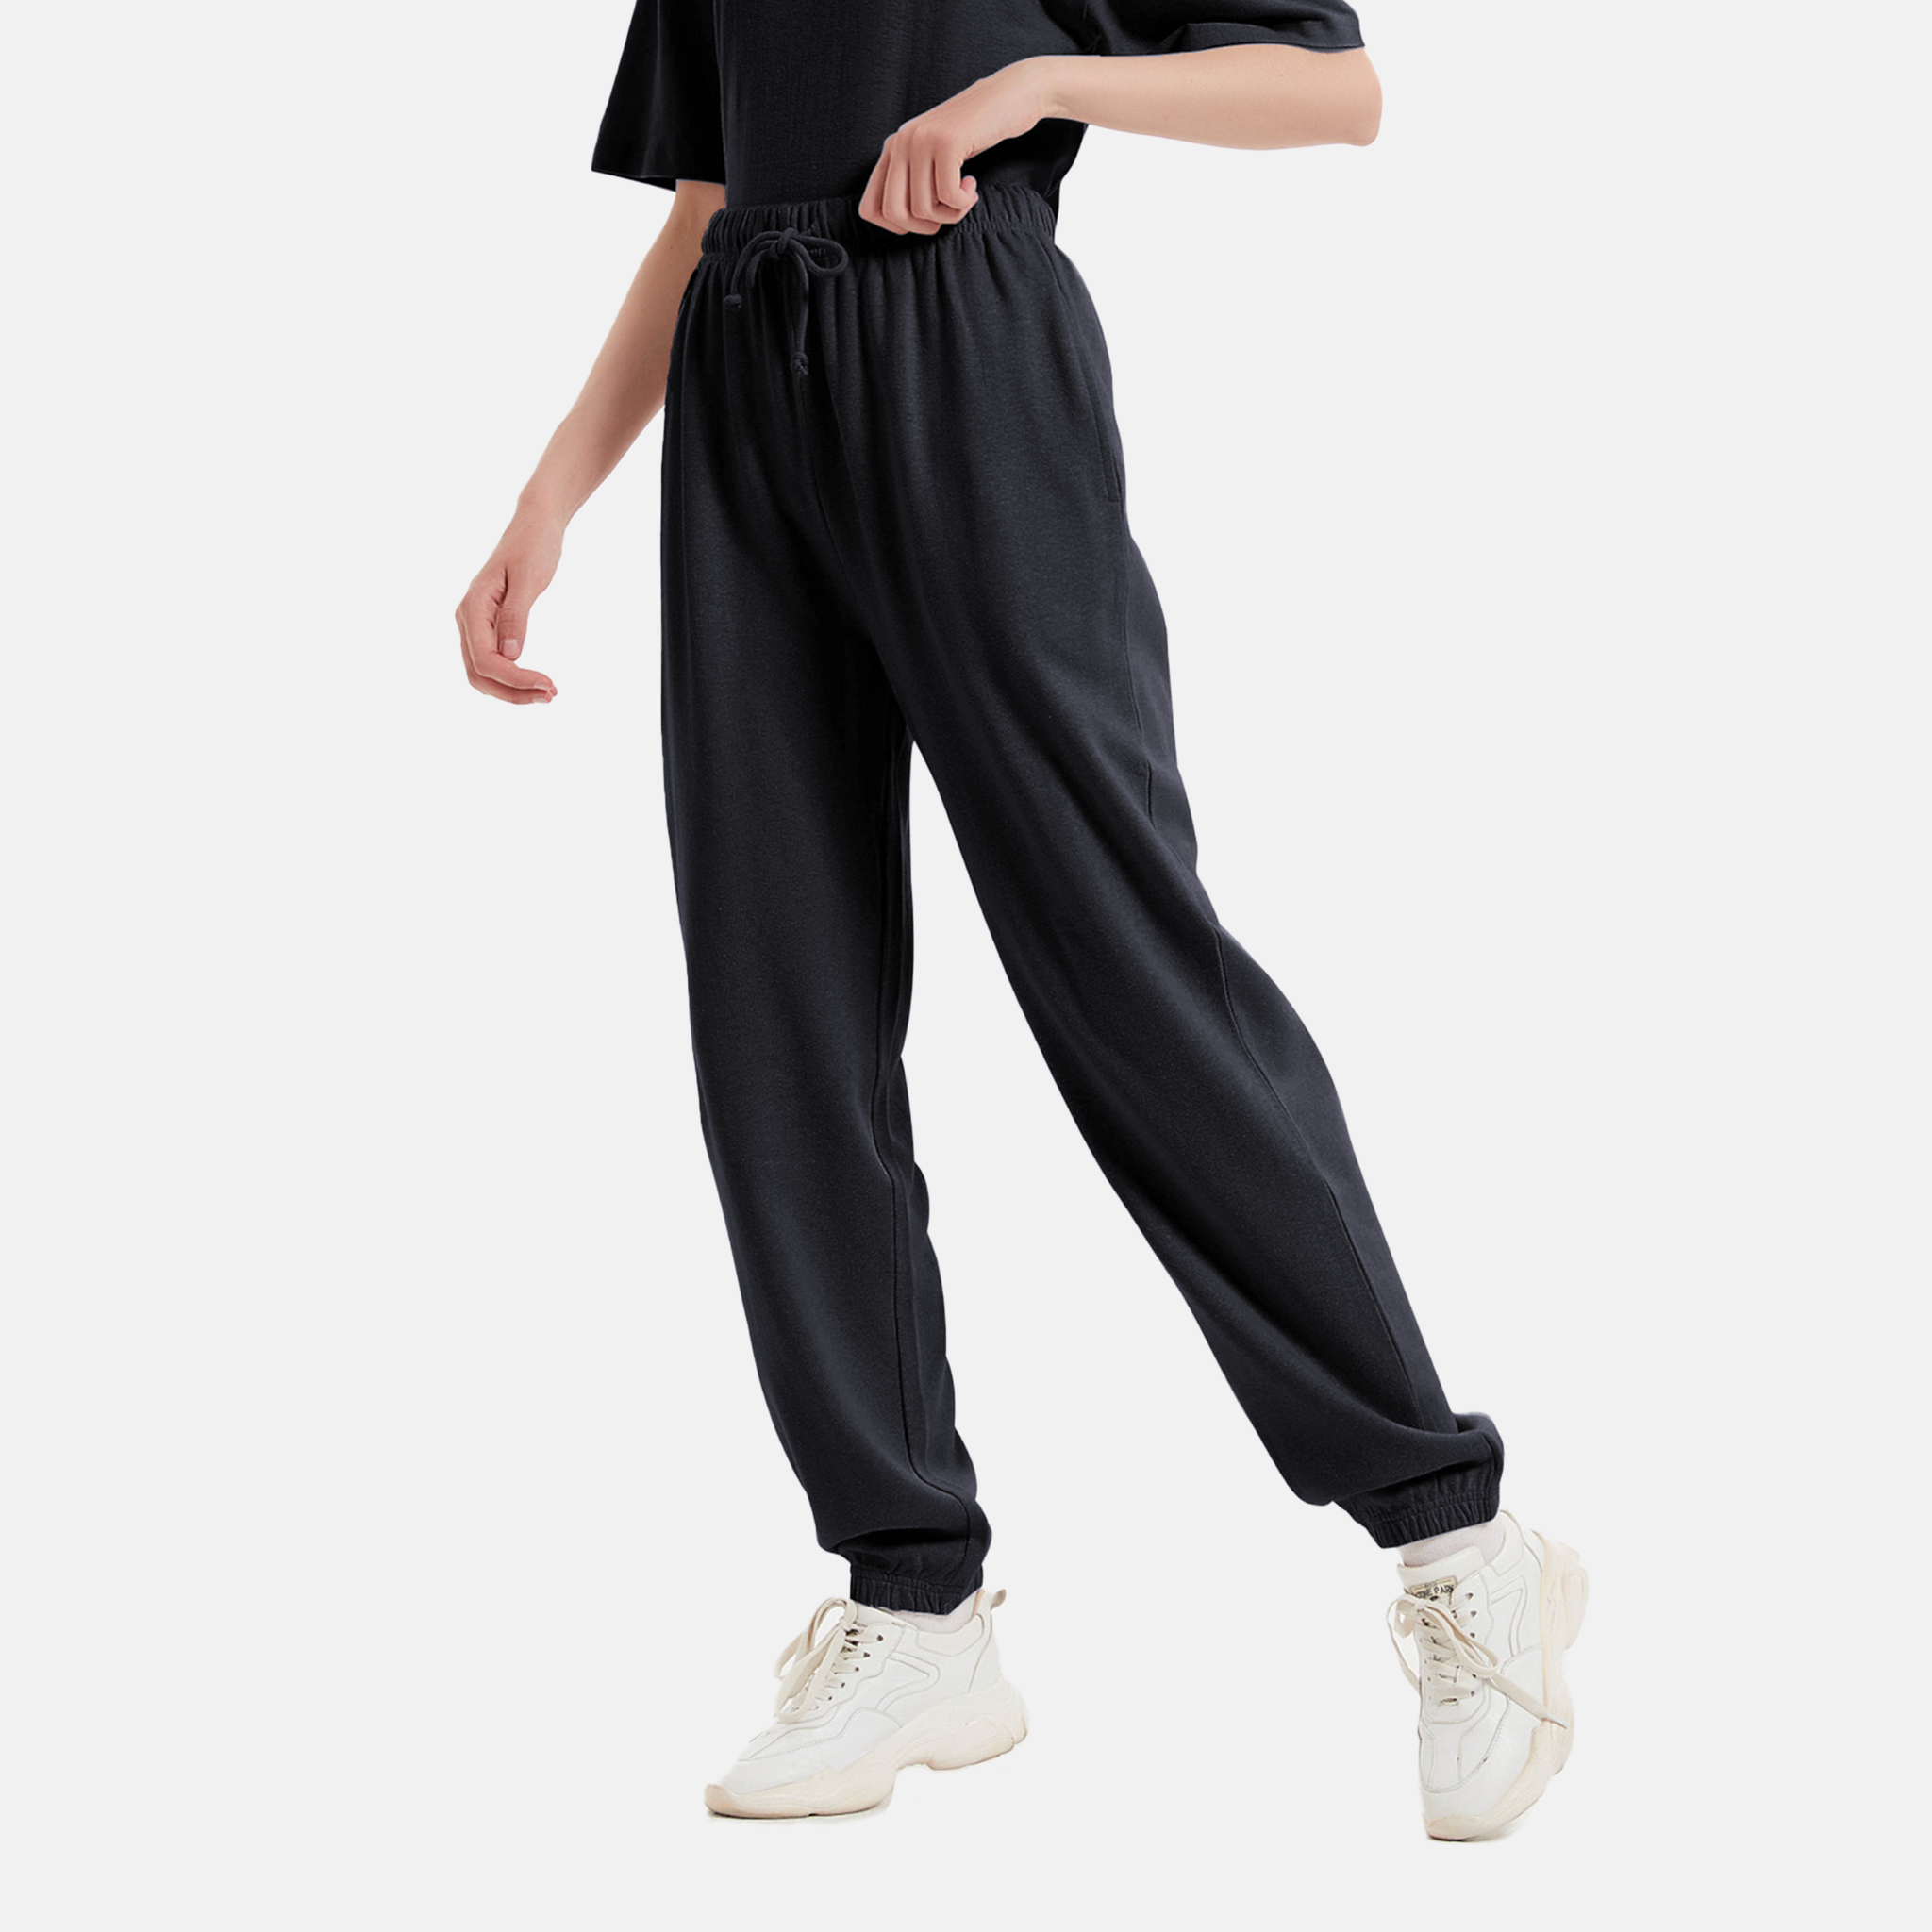 Black Sustainable Sweatpants, Eco-friendly Comfort for Everyday Wear